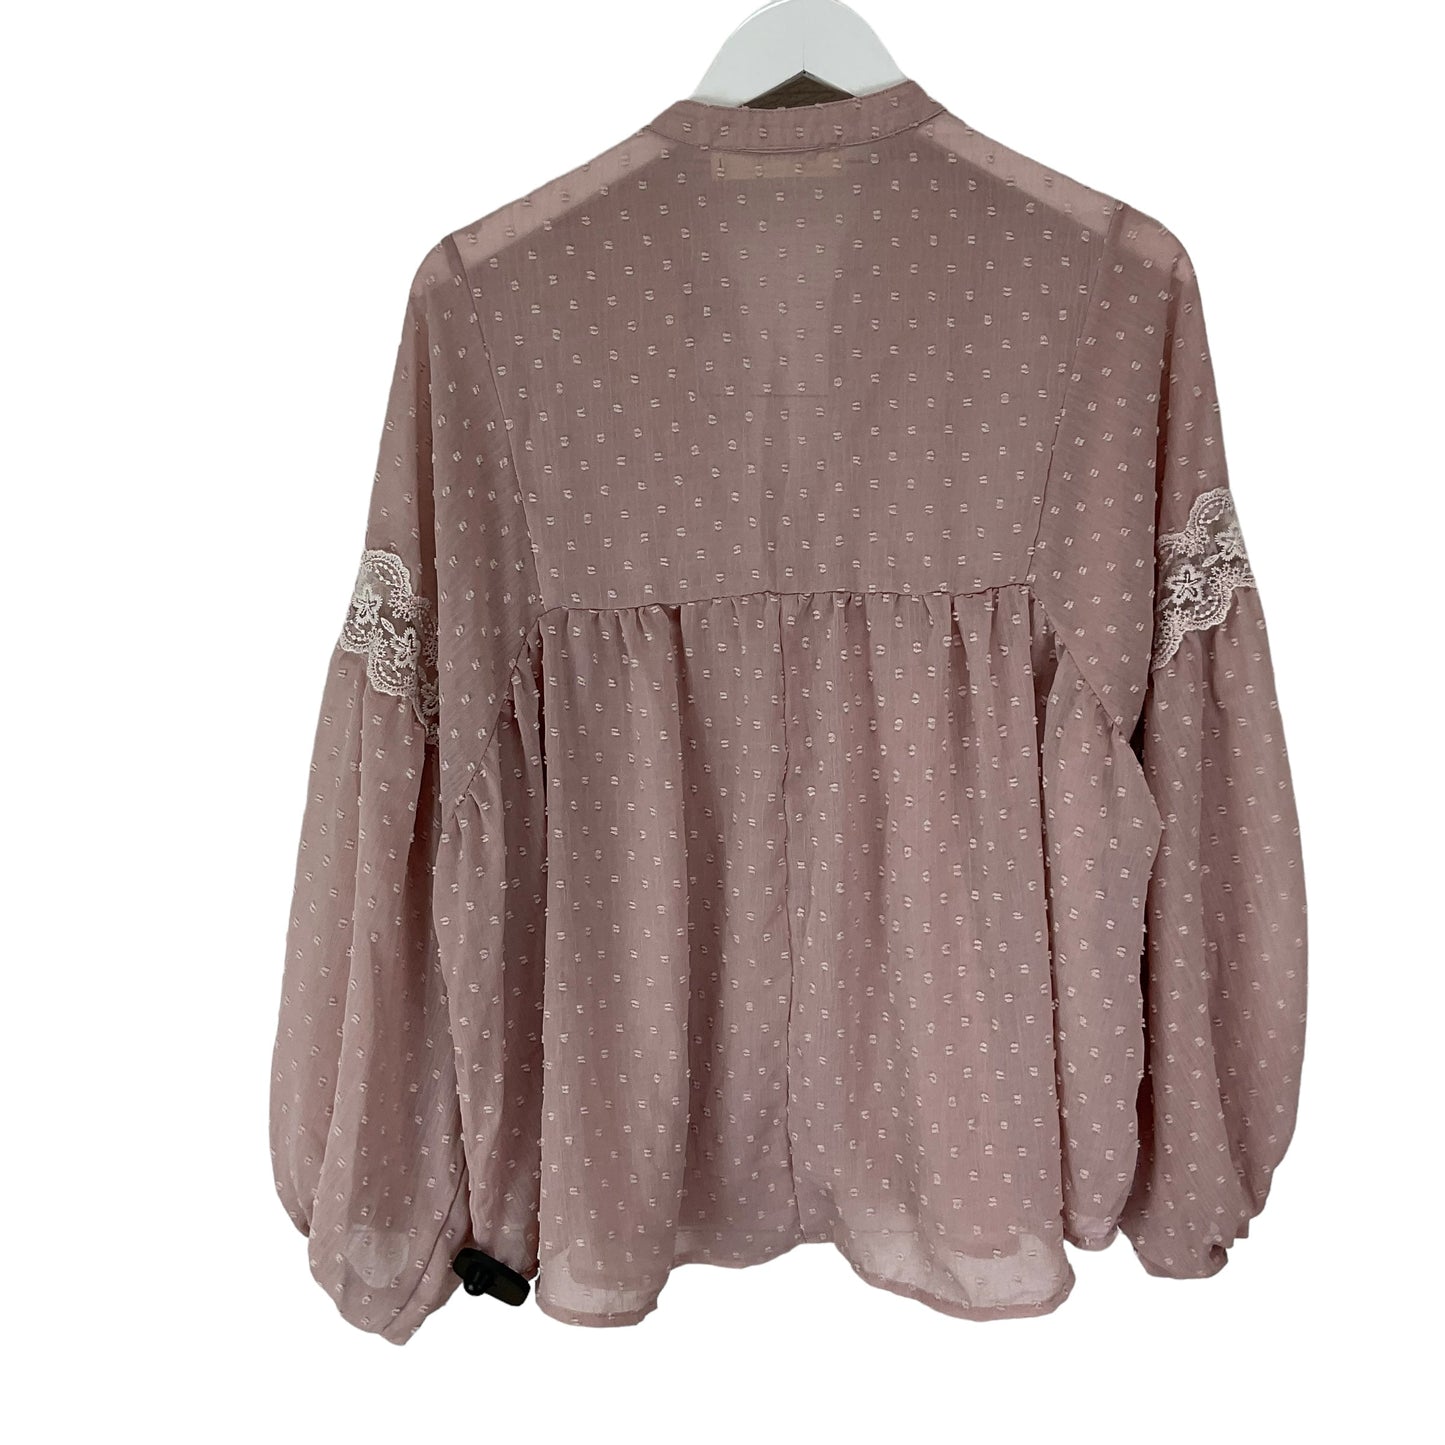 Pink Top Long Sleeve Clothes Mentor, Size S